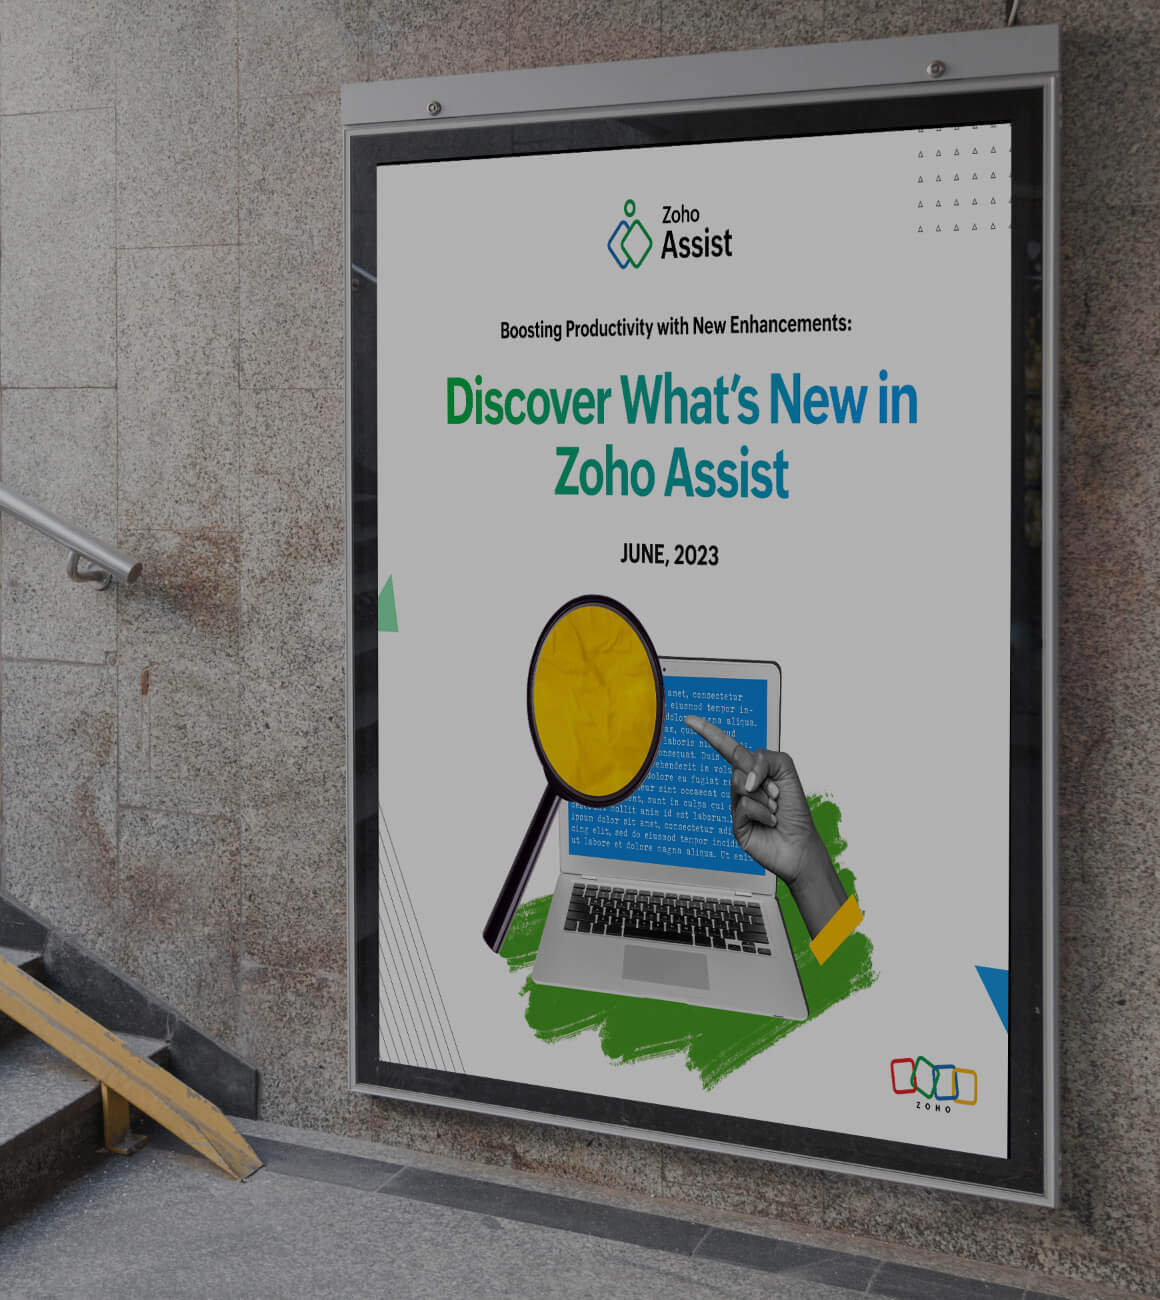 Share timely and customized messages with Zoho Assist-enabled digital signage